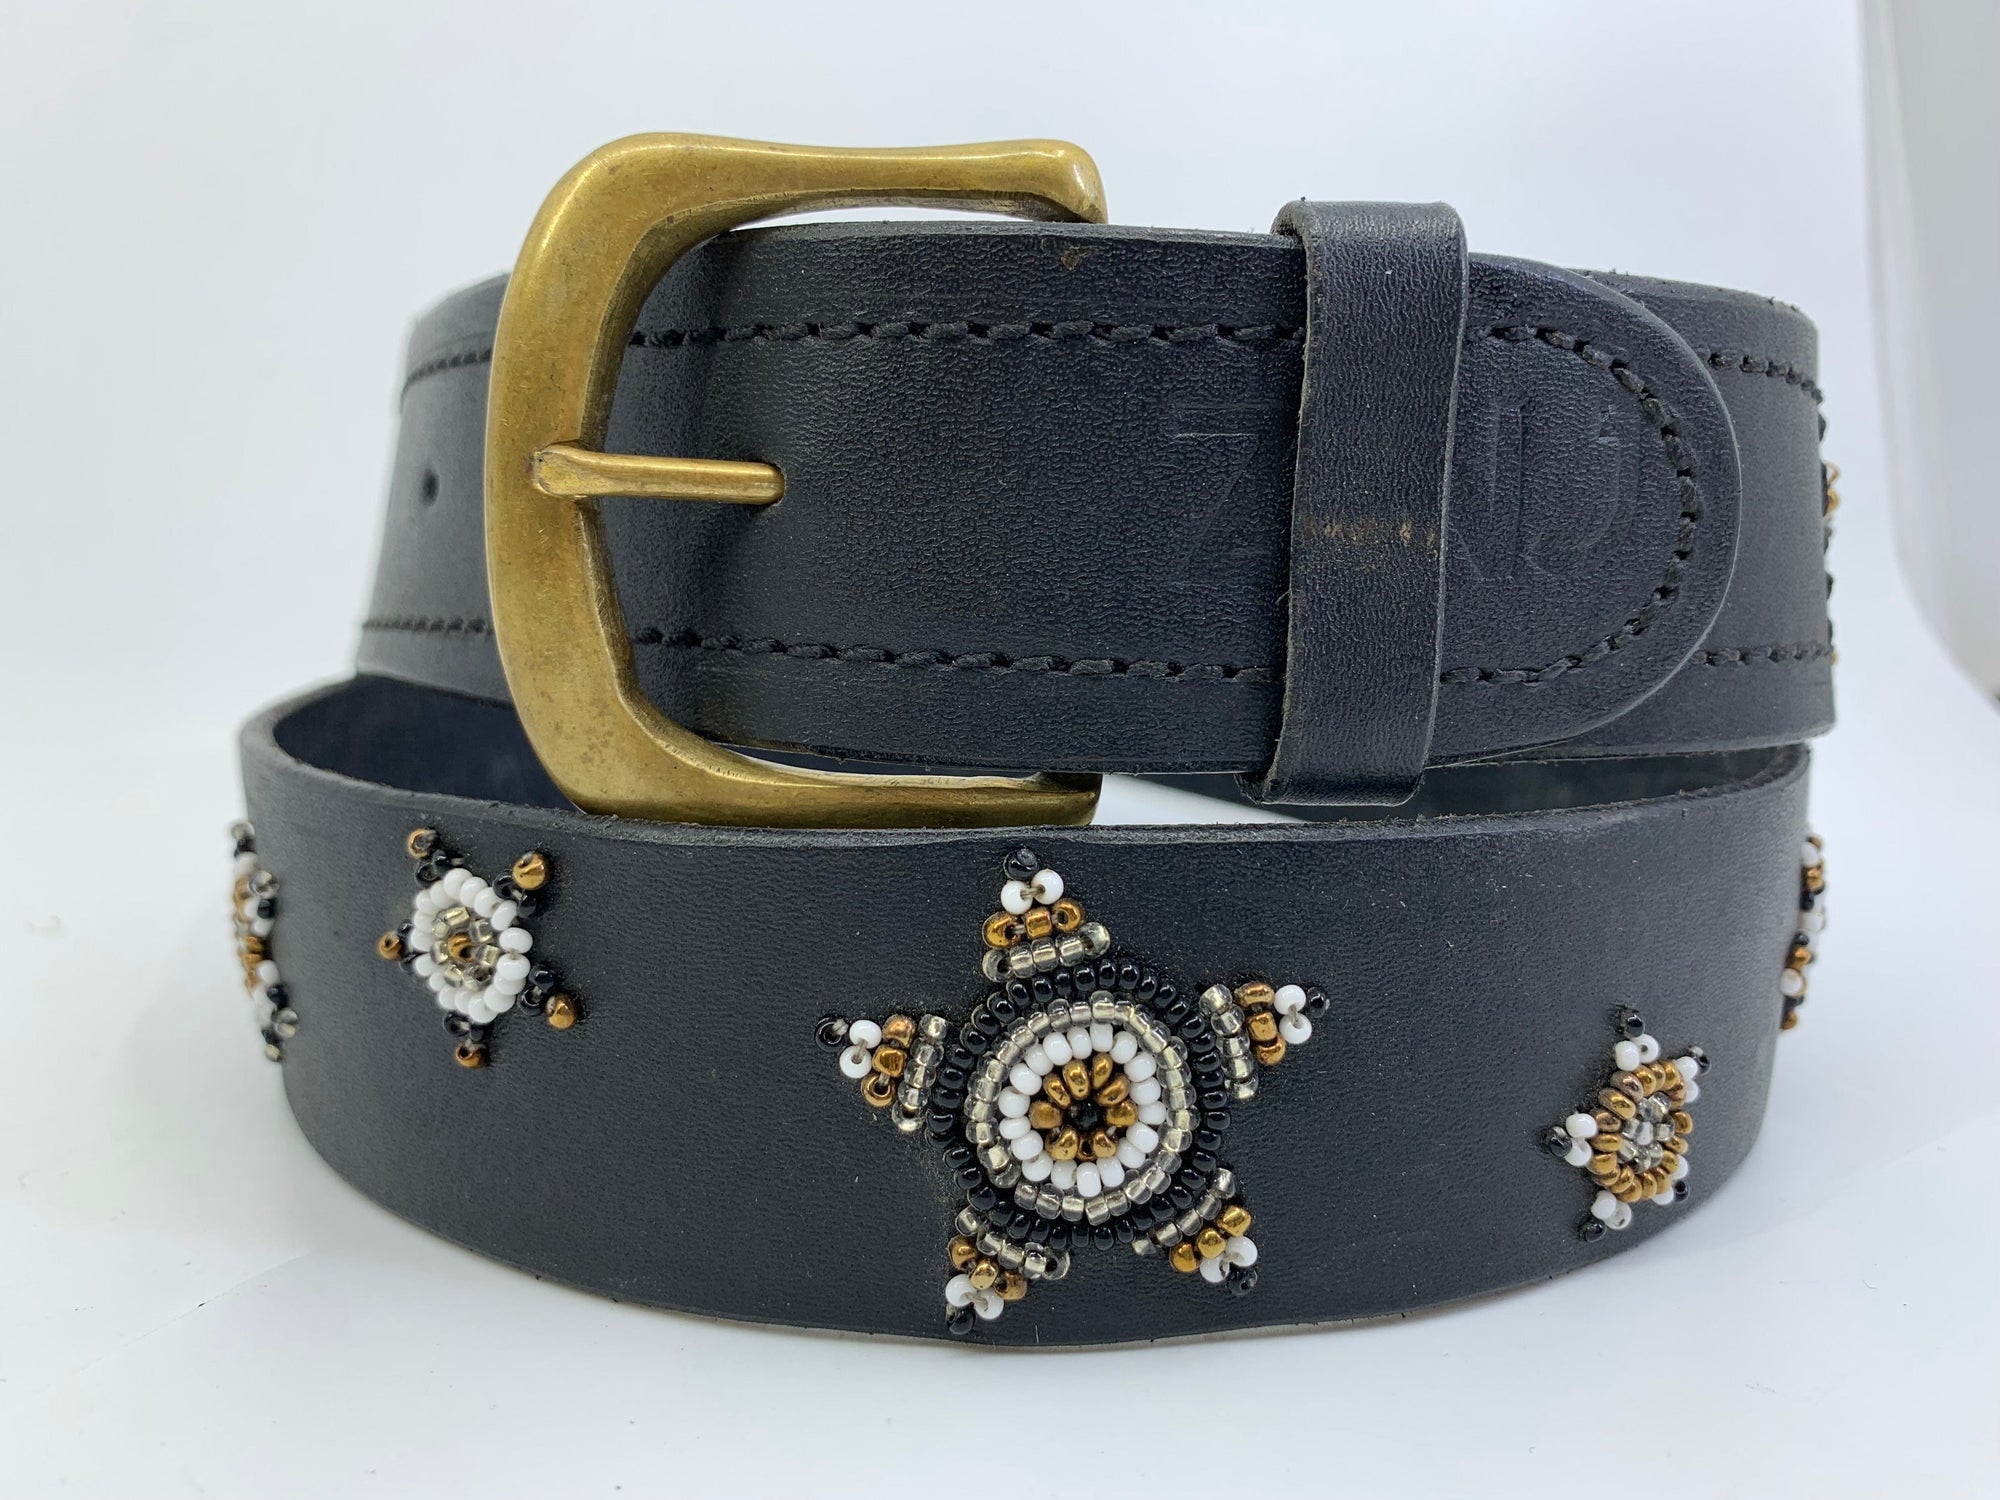 Equestrian Team Apparel M Beaded Belt- 1" White/Gold/Black/Silver Stars equestrian team apparel online tack store mobile tack store custom farm apparel custom show stable clothing equestrian lifestyle horse show clothing riding clothes horses equestrian tack store